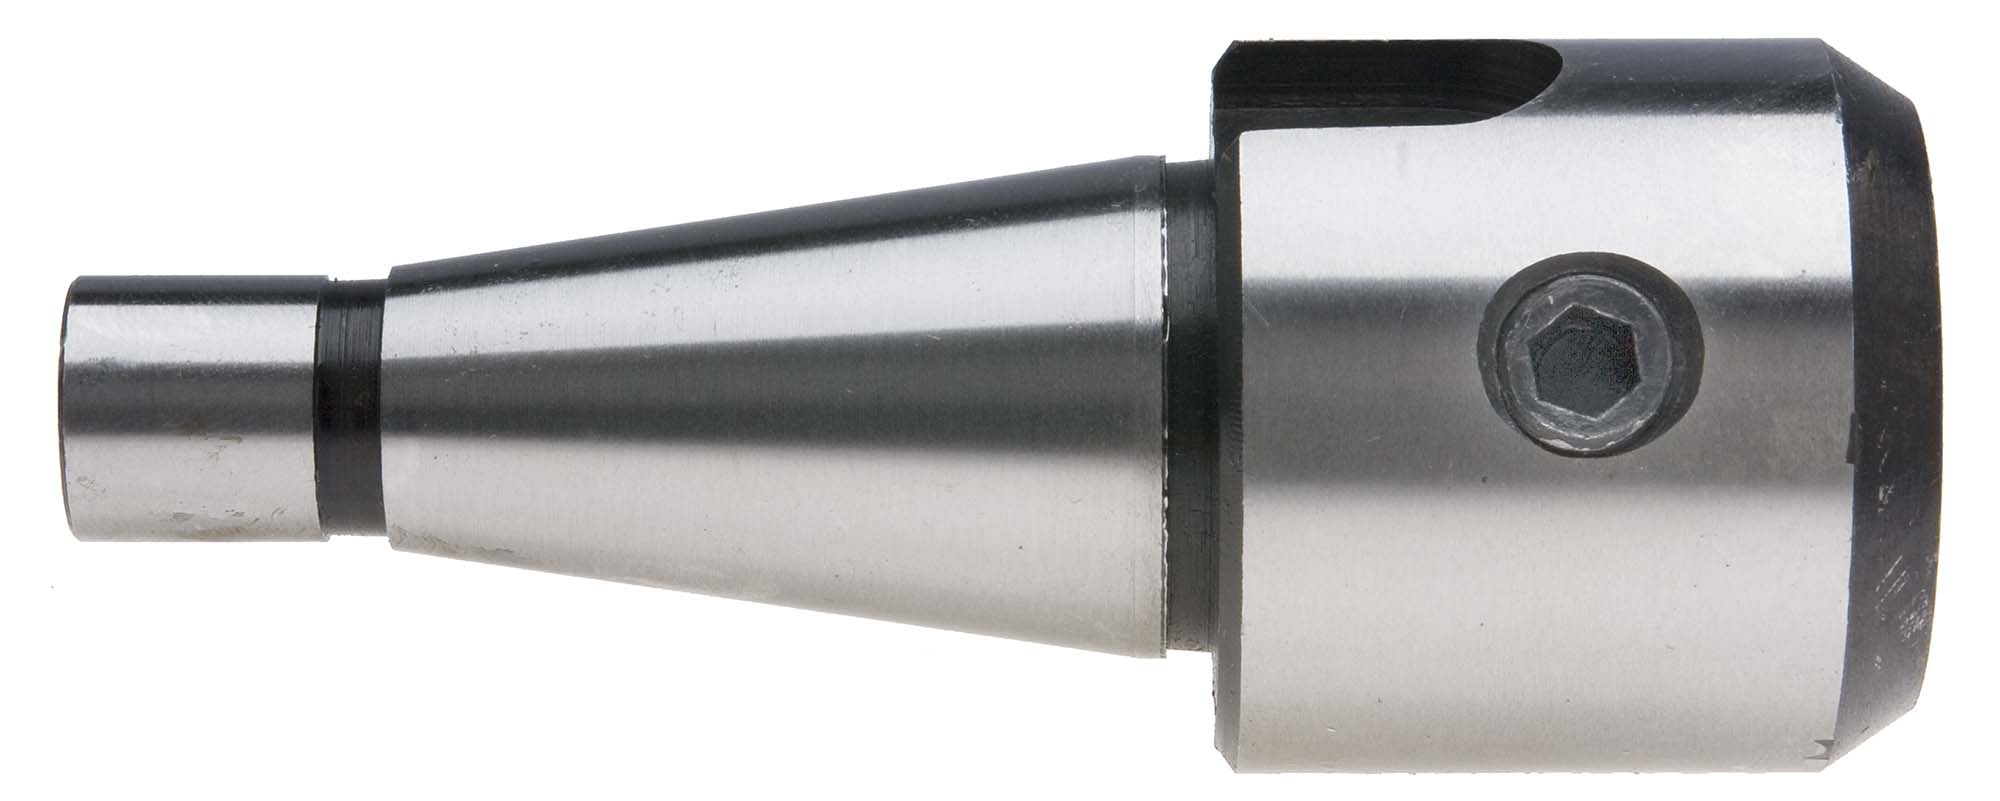 # 40 NST - 5/8 End Mill Adapter